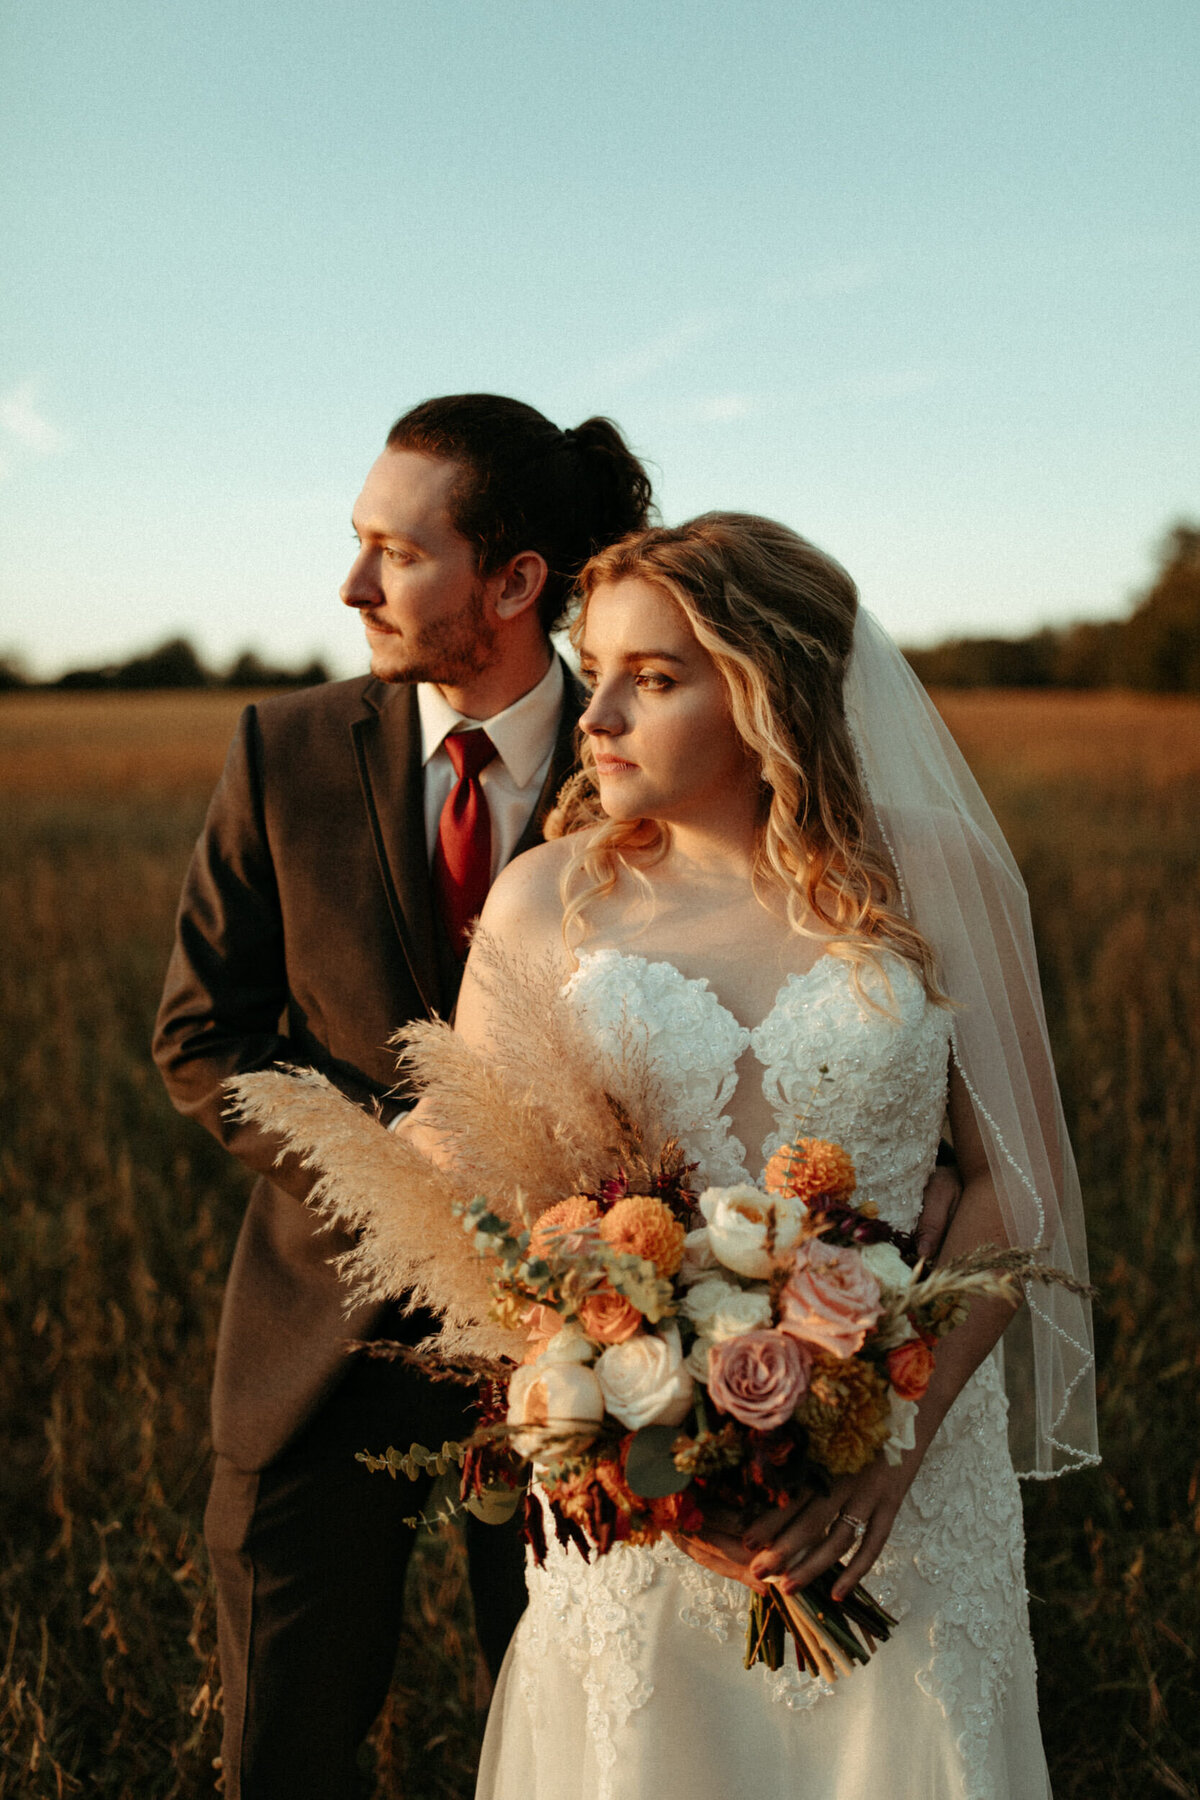 Bride in wedding dress and veil holding floral bouquet with pampas grass standing in front of the groom in grey suit in a field watching sunset